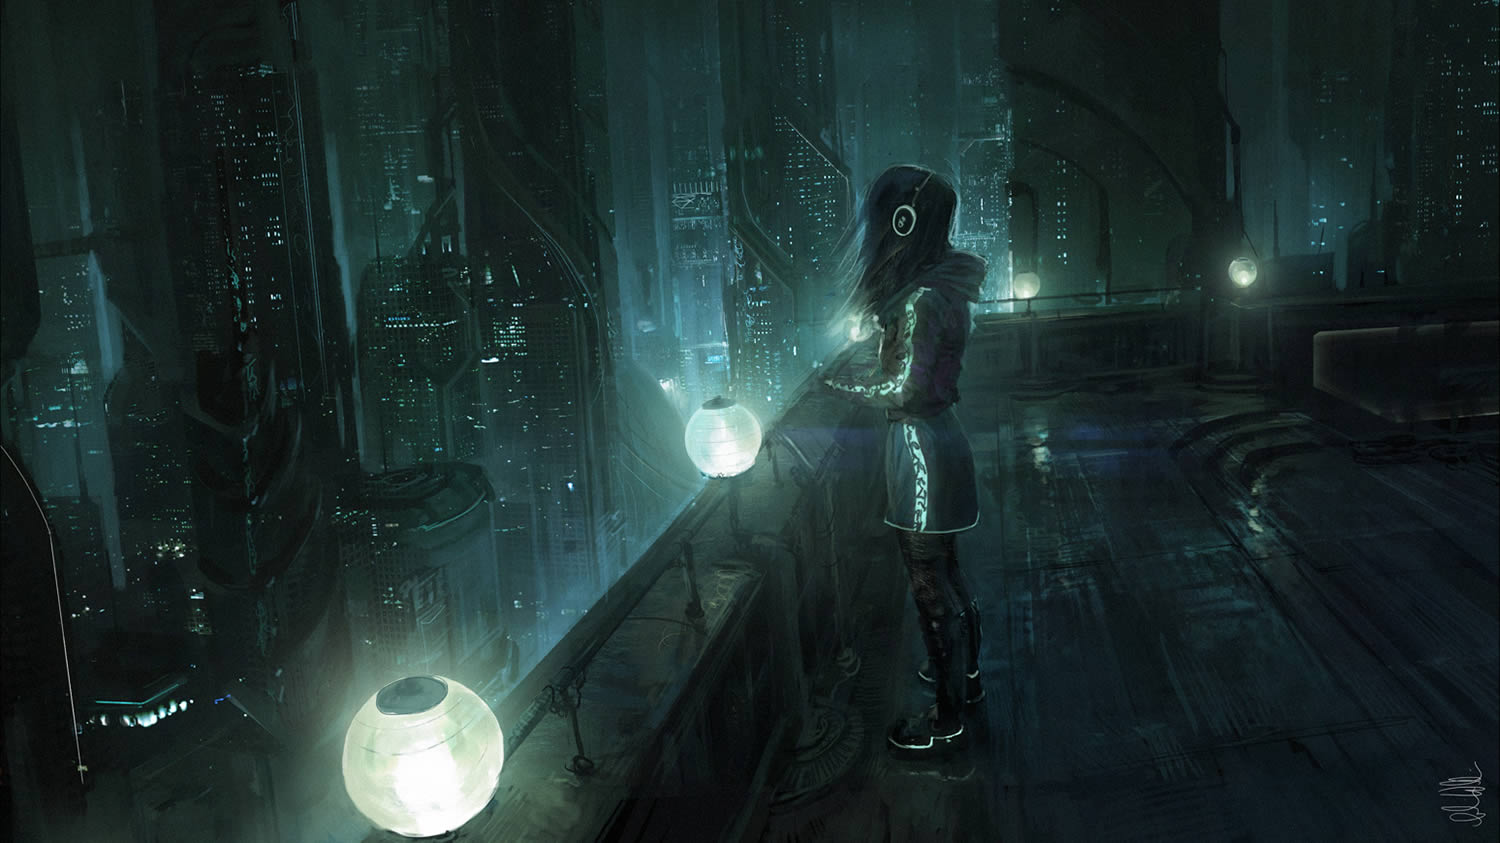 girl in a jupiter ascending style future scene, looking over a balcony. by apocalyptic scene by Andree Wallin